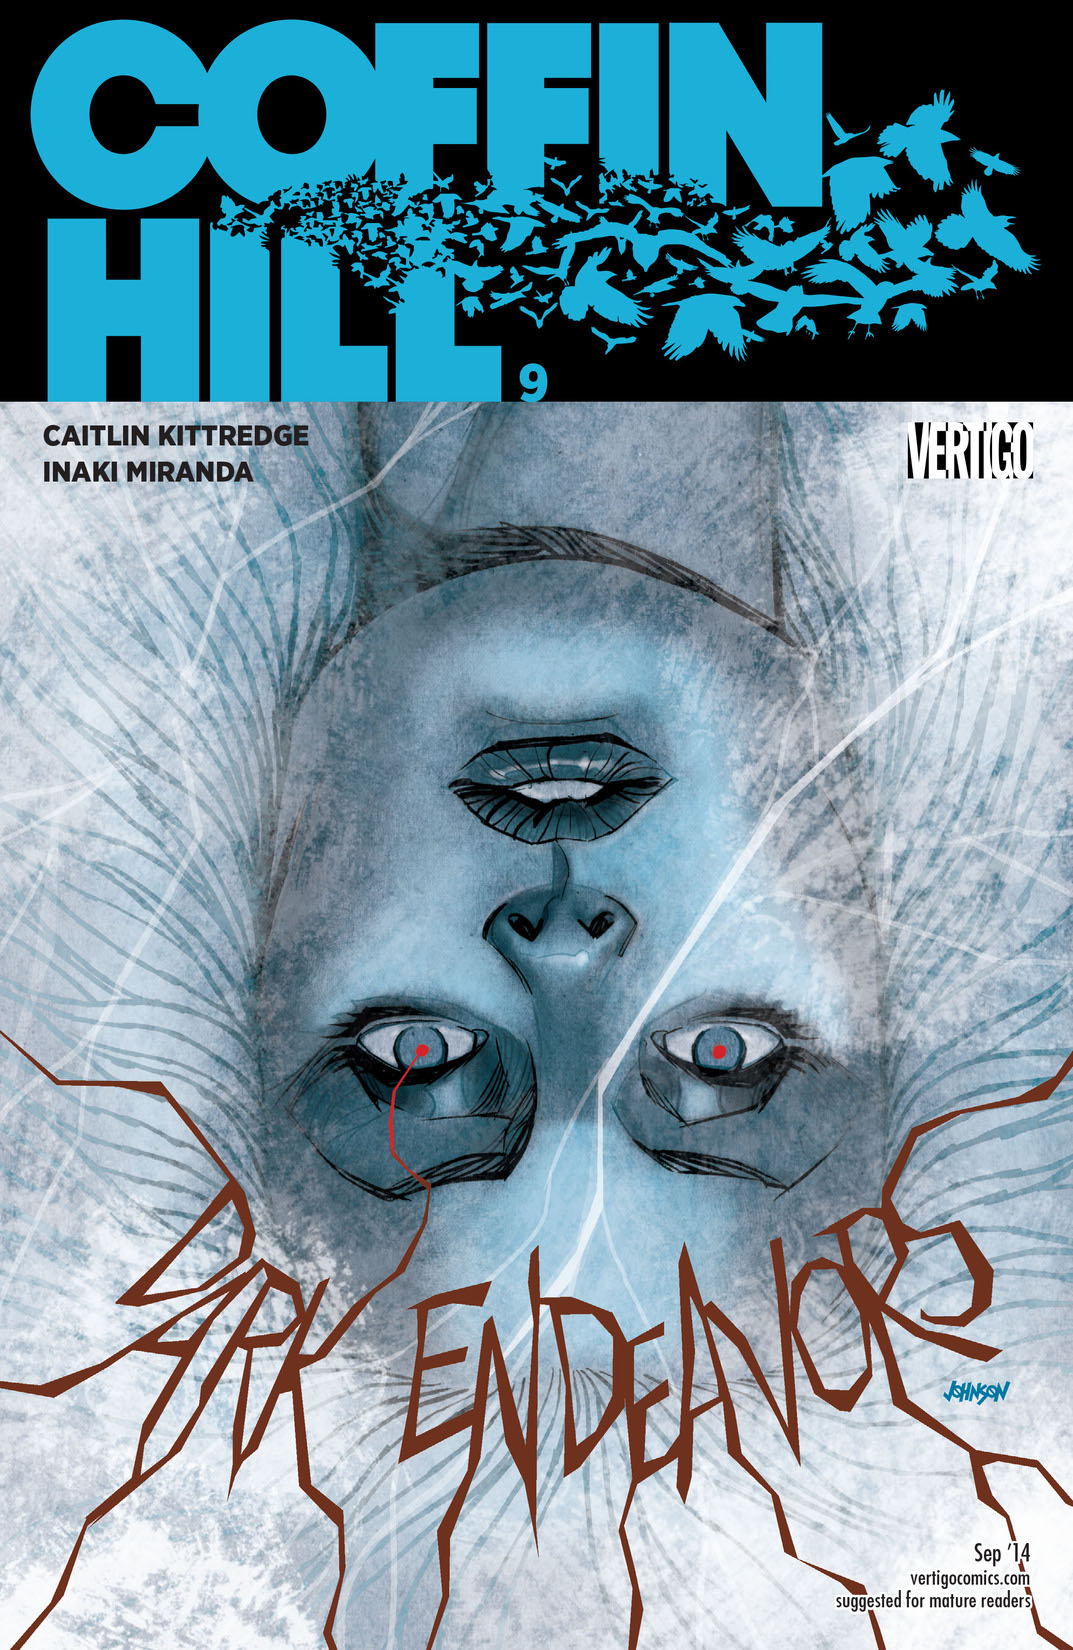 Coffin Hill #9 preview images